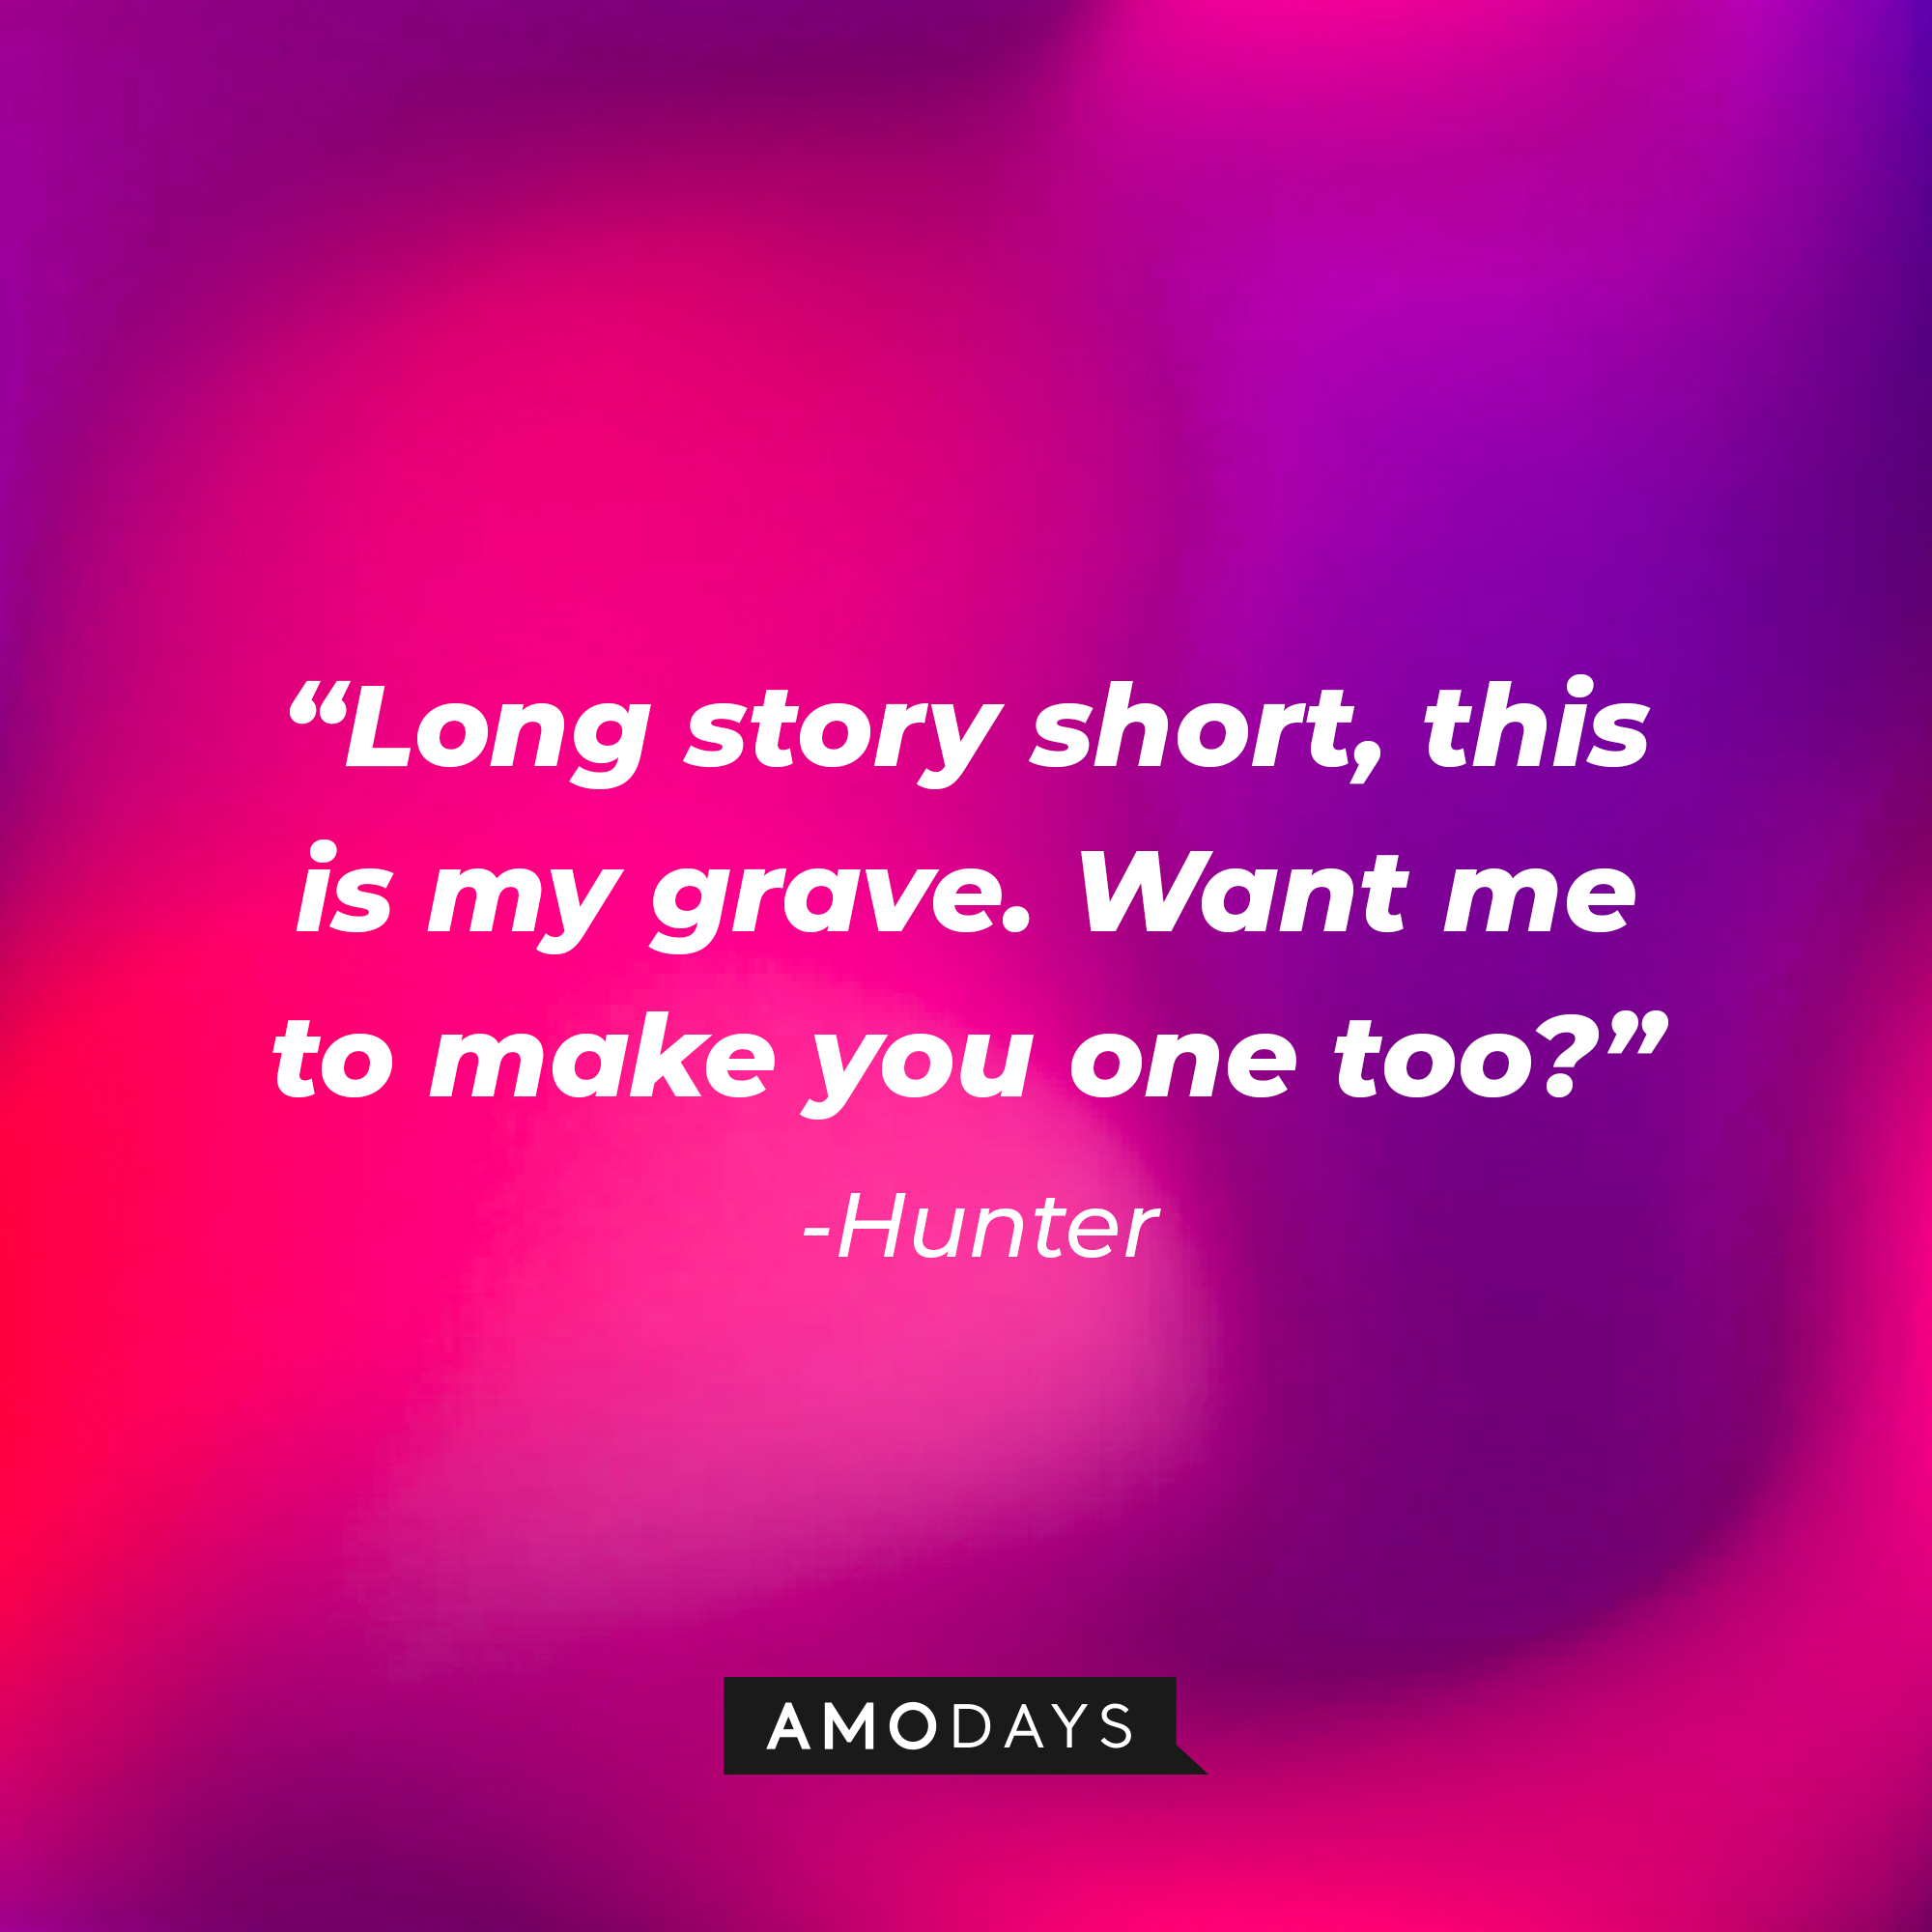 A photo with Hunter's quote, "Long story short, this is my grave. Want me to make you one too?" | Source: Amodays